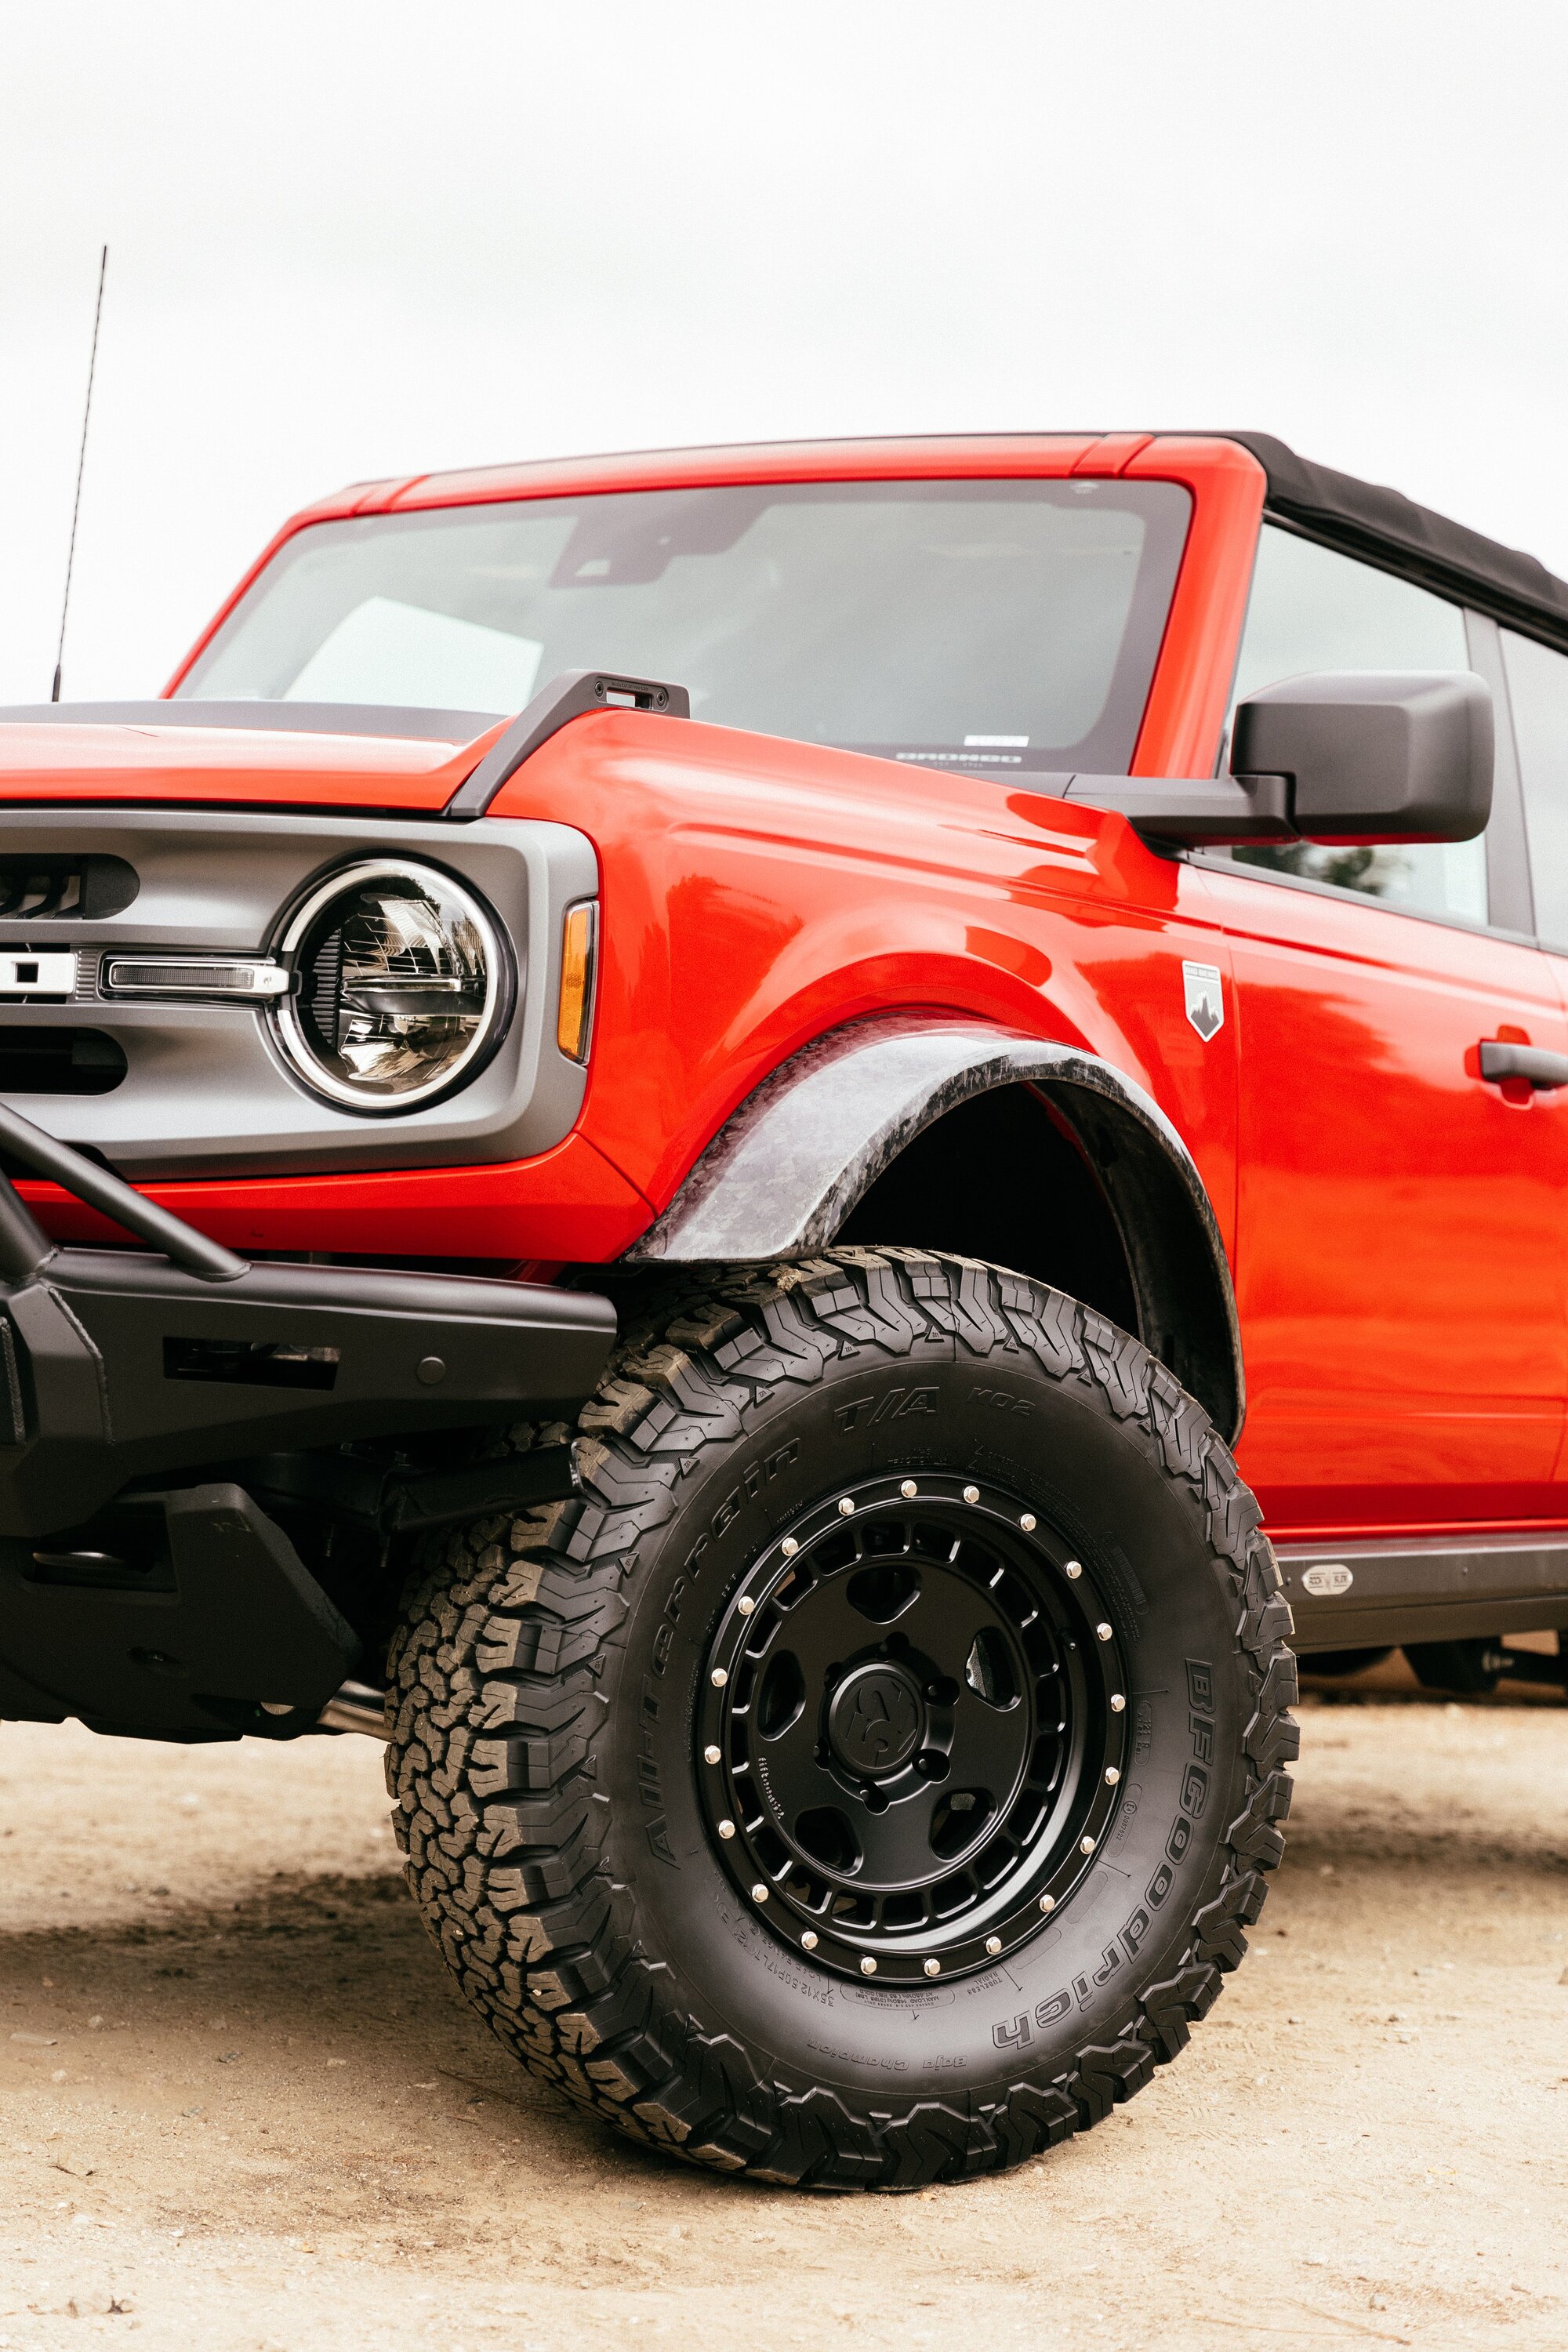 Ford Bronco fifteen52 Turbomac HD - 20% off Now through July 1st at Apollo Optics! gr9cEEfQ